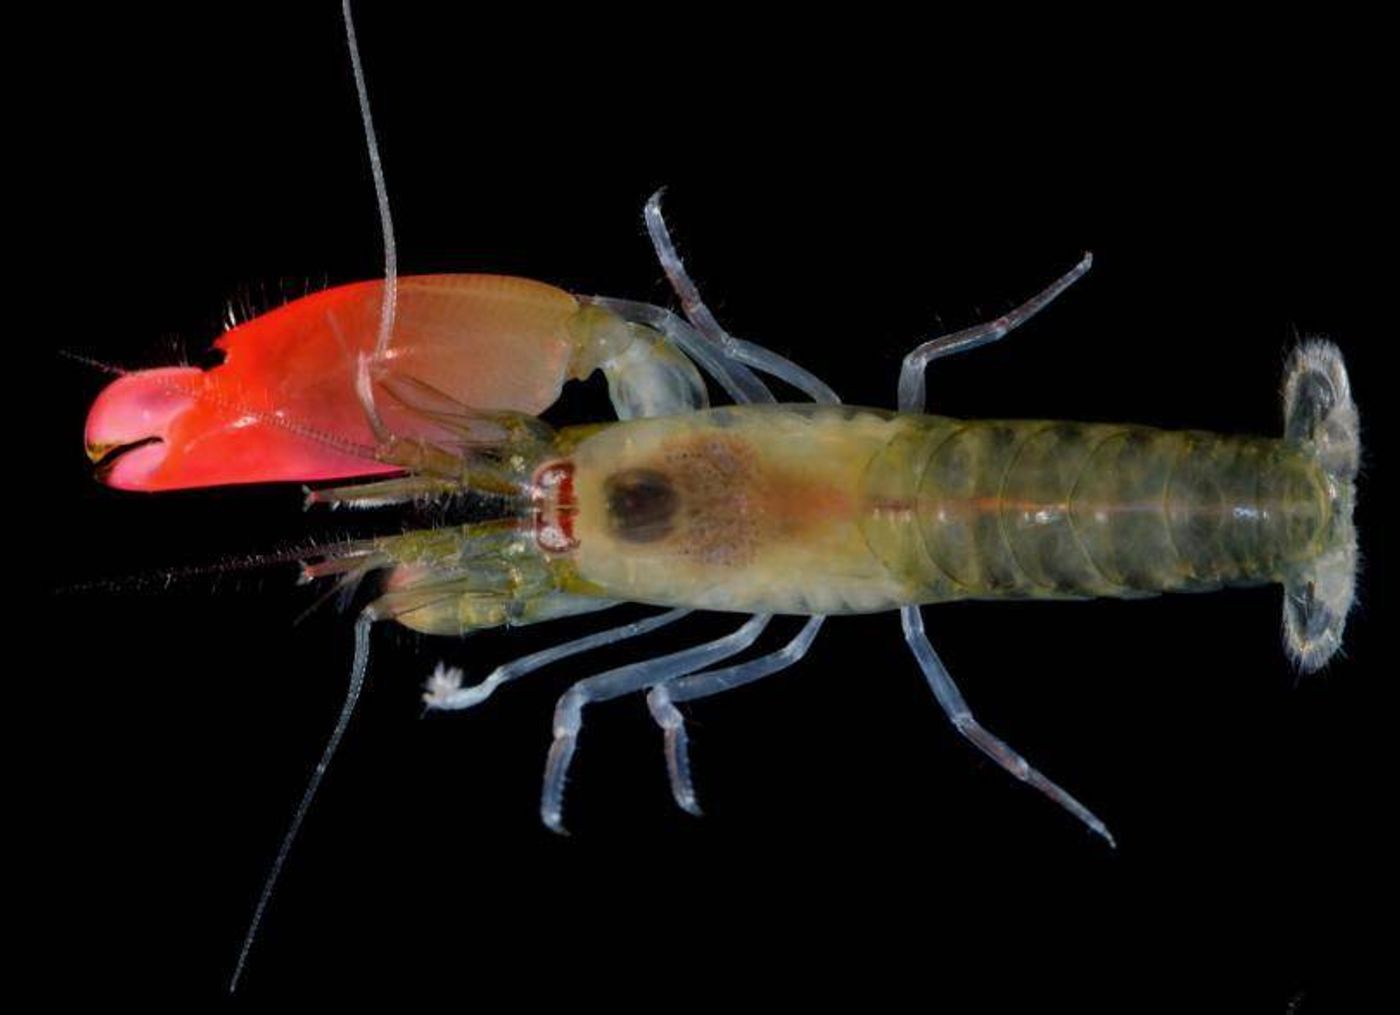 The new species of pistol shrimp that has been named after the band Pink Floyd.